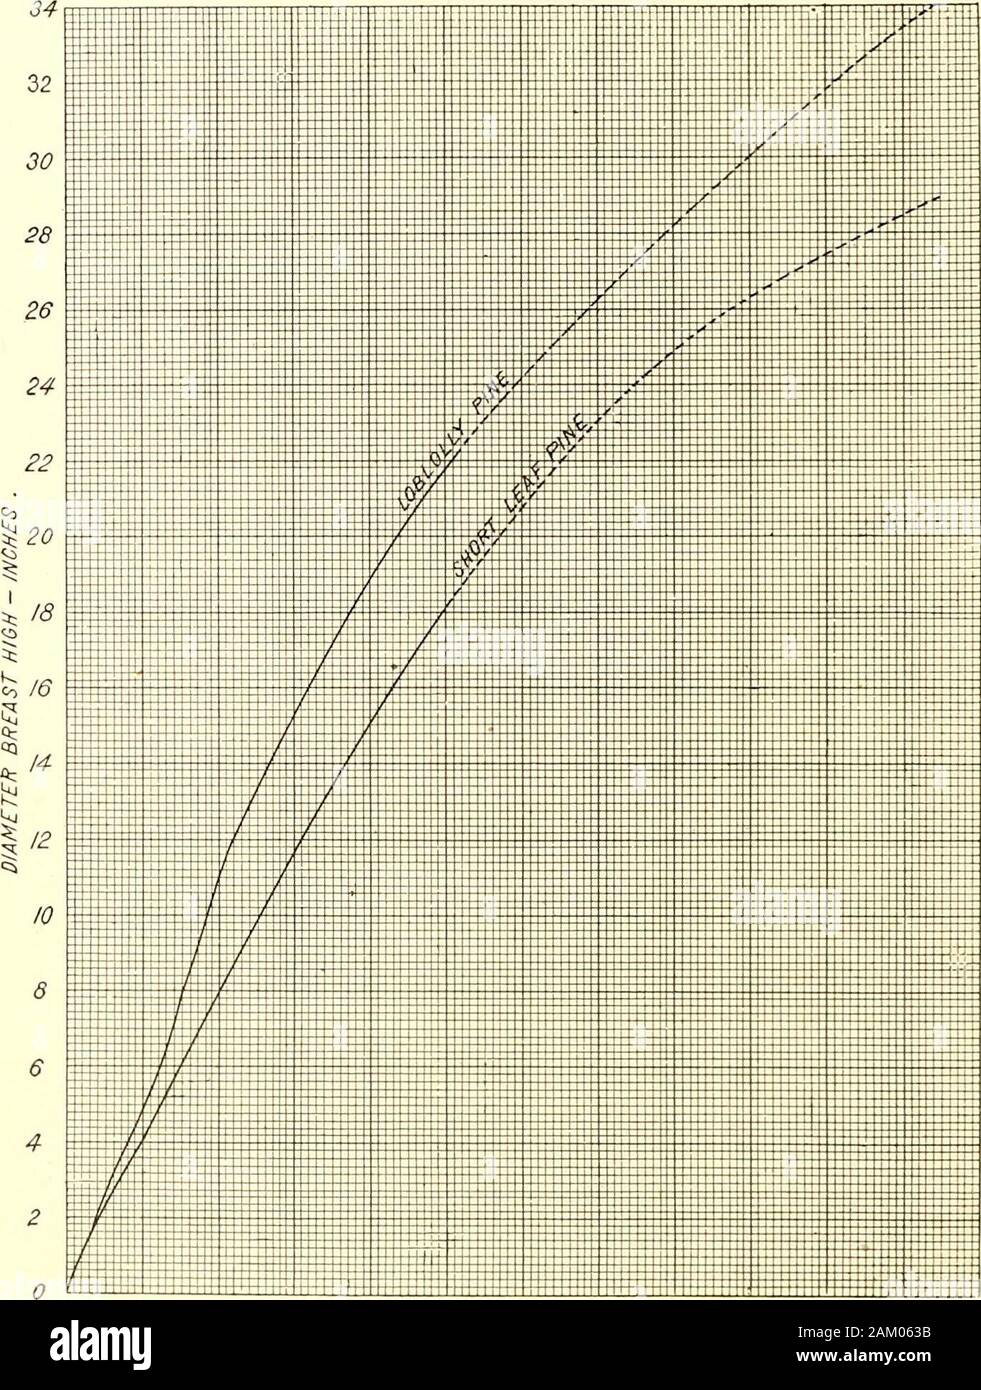 A working plan for forest lands near Pine Bluff, Arkansas . HE/e/fr-FFET. Fig. 4.—Diagram showing the height growth of Shortleaf and Loblolly line on the basis of diameter breasthigh. 30 WORKING PLAN FOR FOREST LANDS NEAR PINE BLUFF, ARK. the first one hundred years the yearly average growth in height is0.S3 foot, and for the first twenty years 1.5 feet. (See tig. 8.) Relation of aye to merchantable contents.—The curve here given. 0 20 40 60 80 100 120 140 160 180 200 220 240 AGE — YEARS Fig. 5.—Diagram showing the diameter growth of Shortleaf and Loblolly Pine on the basis of age. shows the v Stock Photo